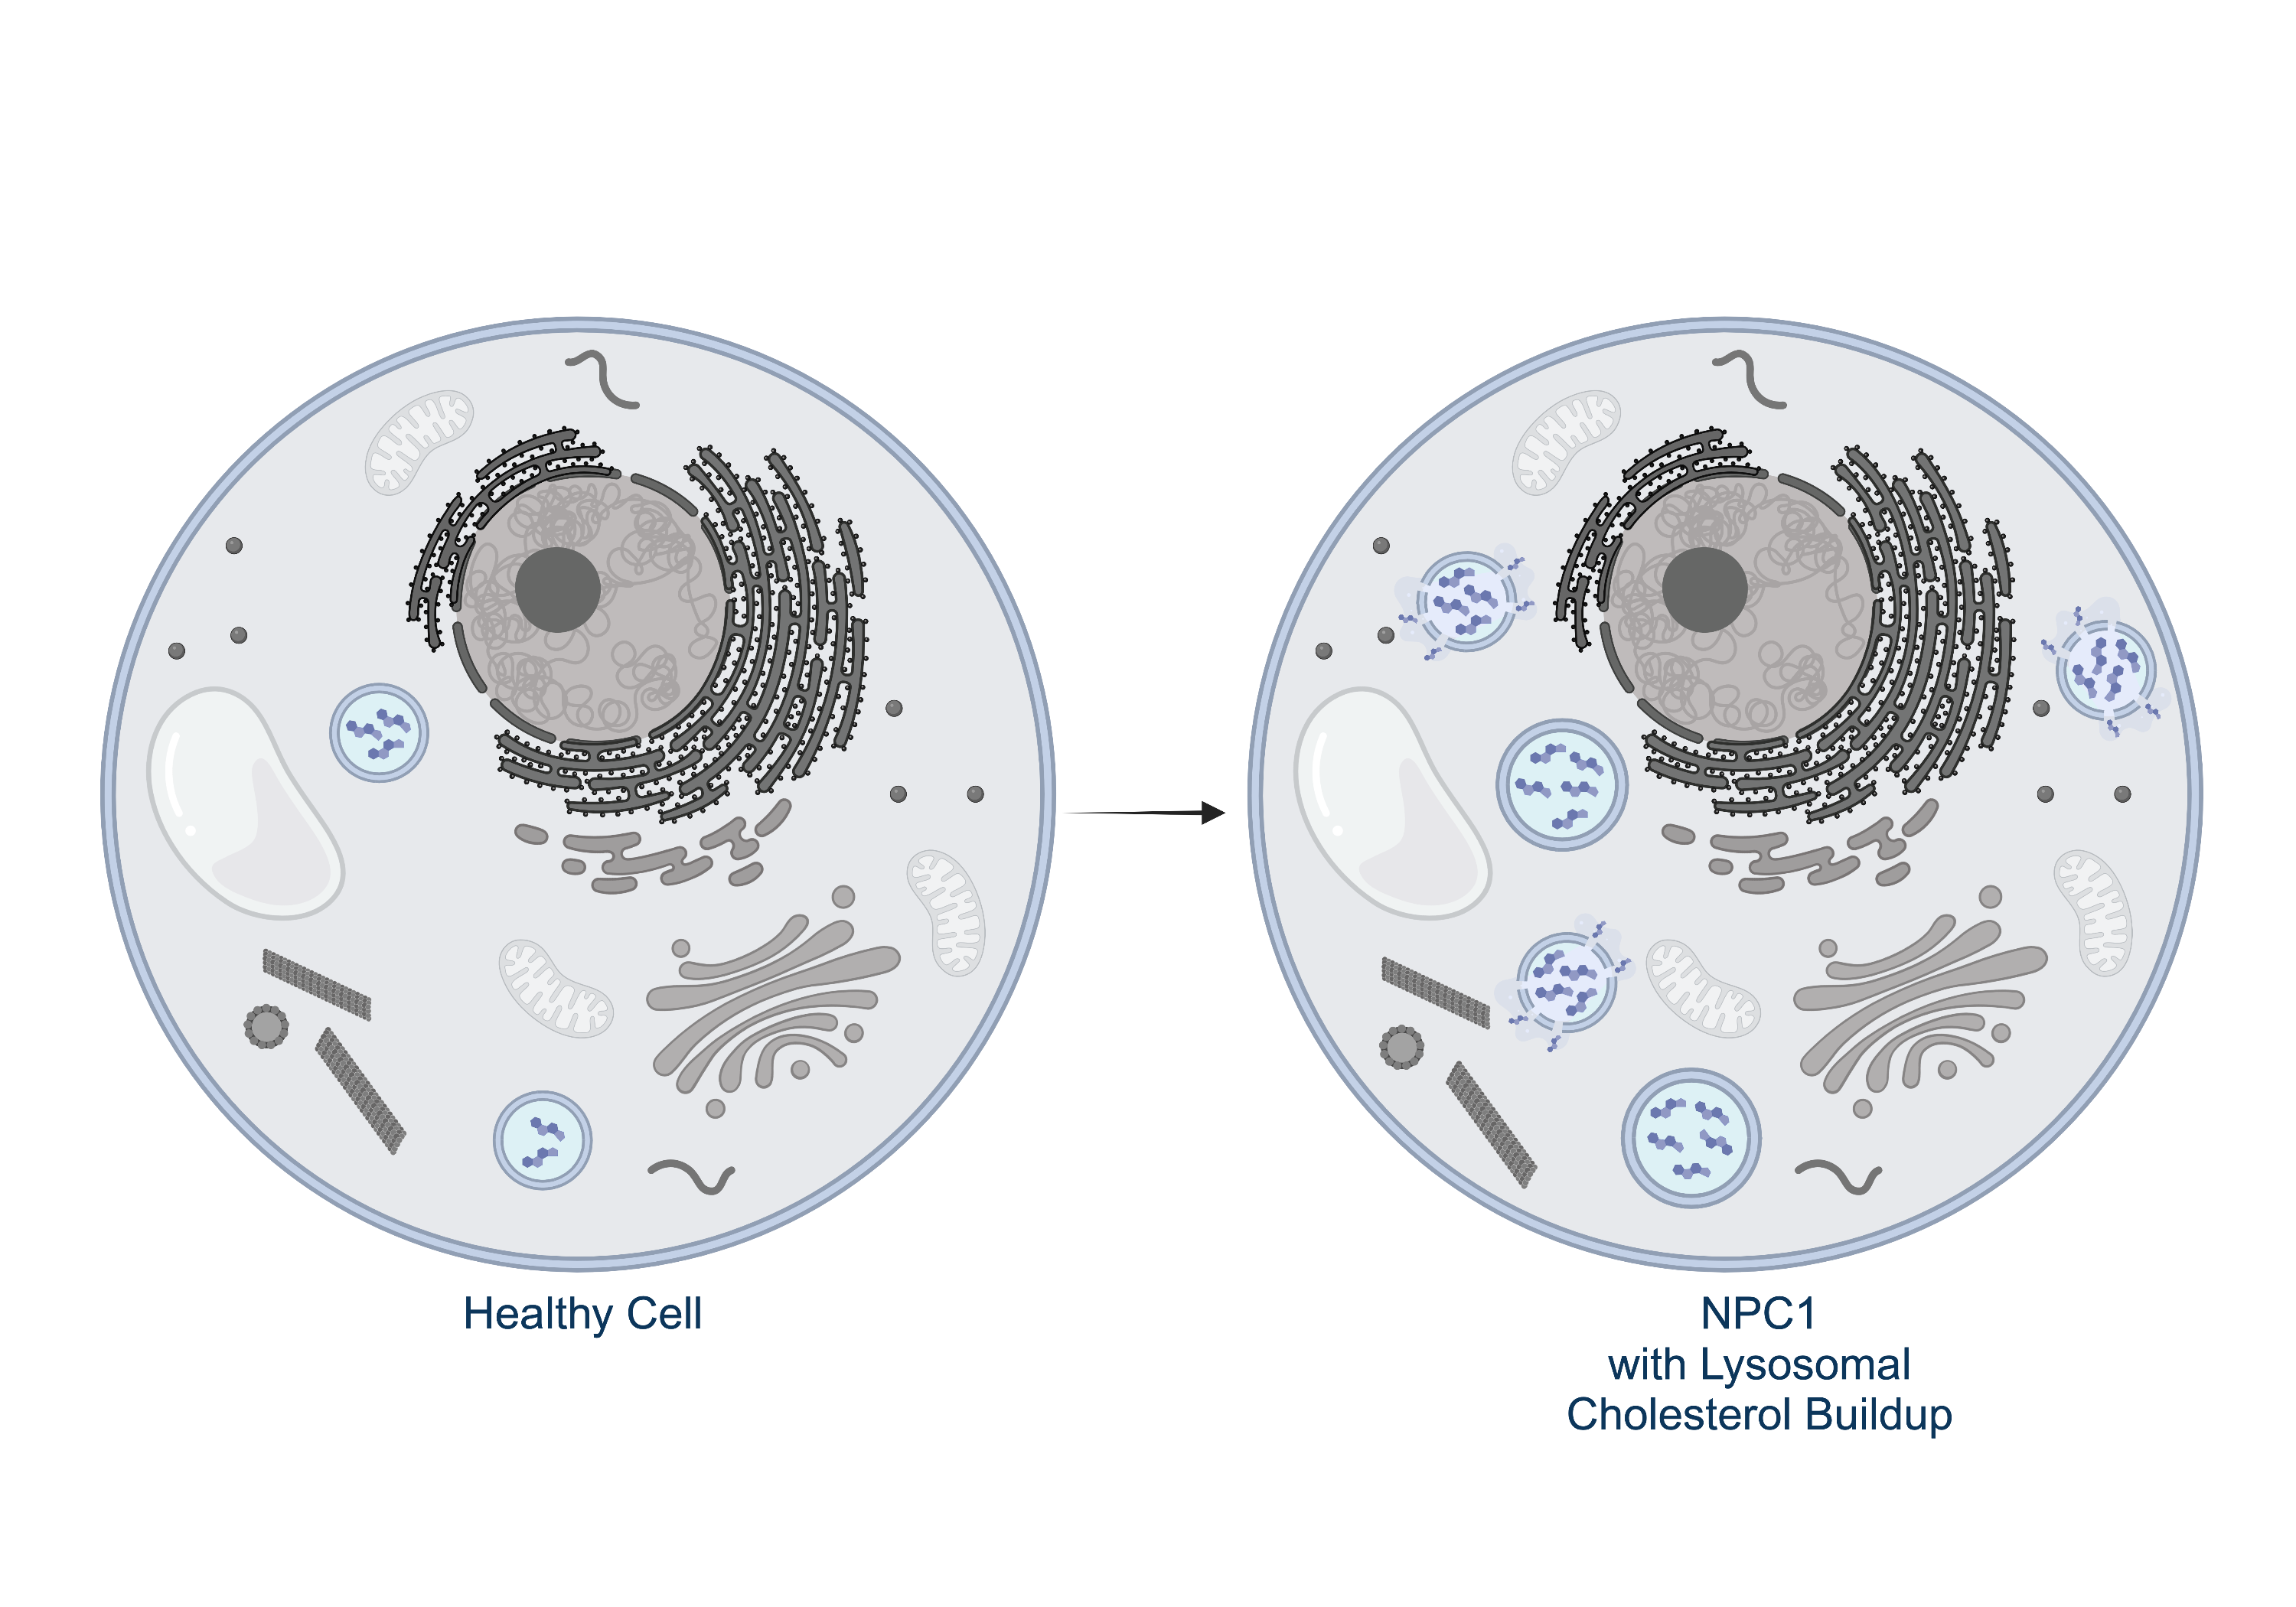 schematic showing lysosomal cholesterol accumulation in an NPC1 cell. Graphics of a healthy cell and an NPC1 cell are displayed, with cholesterol-filled lysosomes being larger and more numerous in the NPC1 cell.